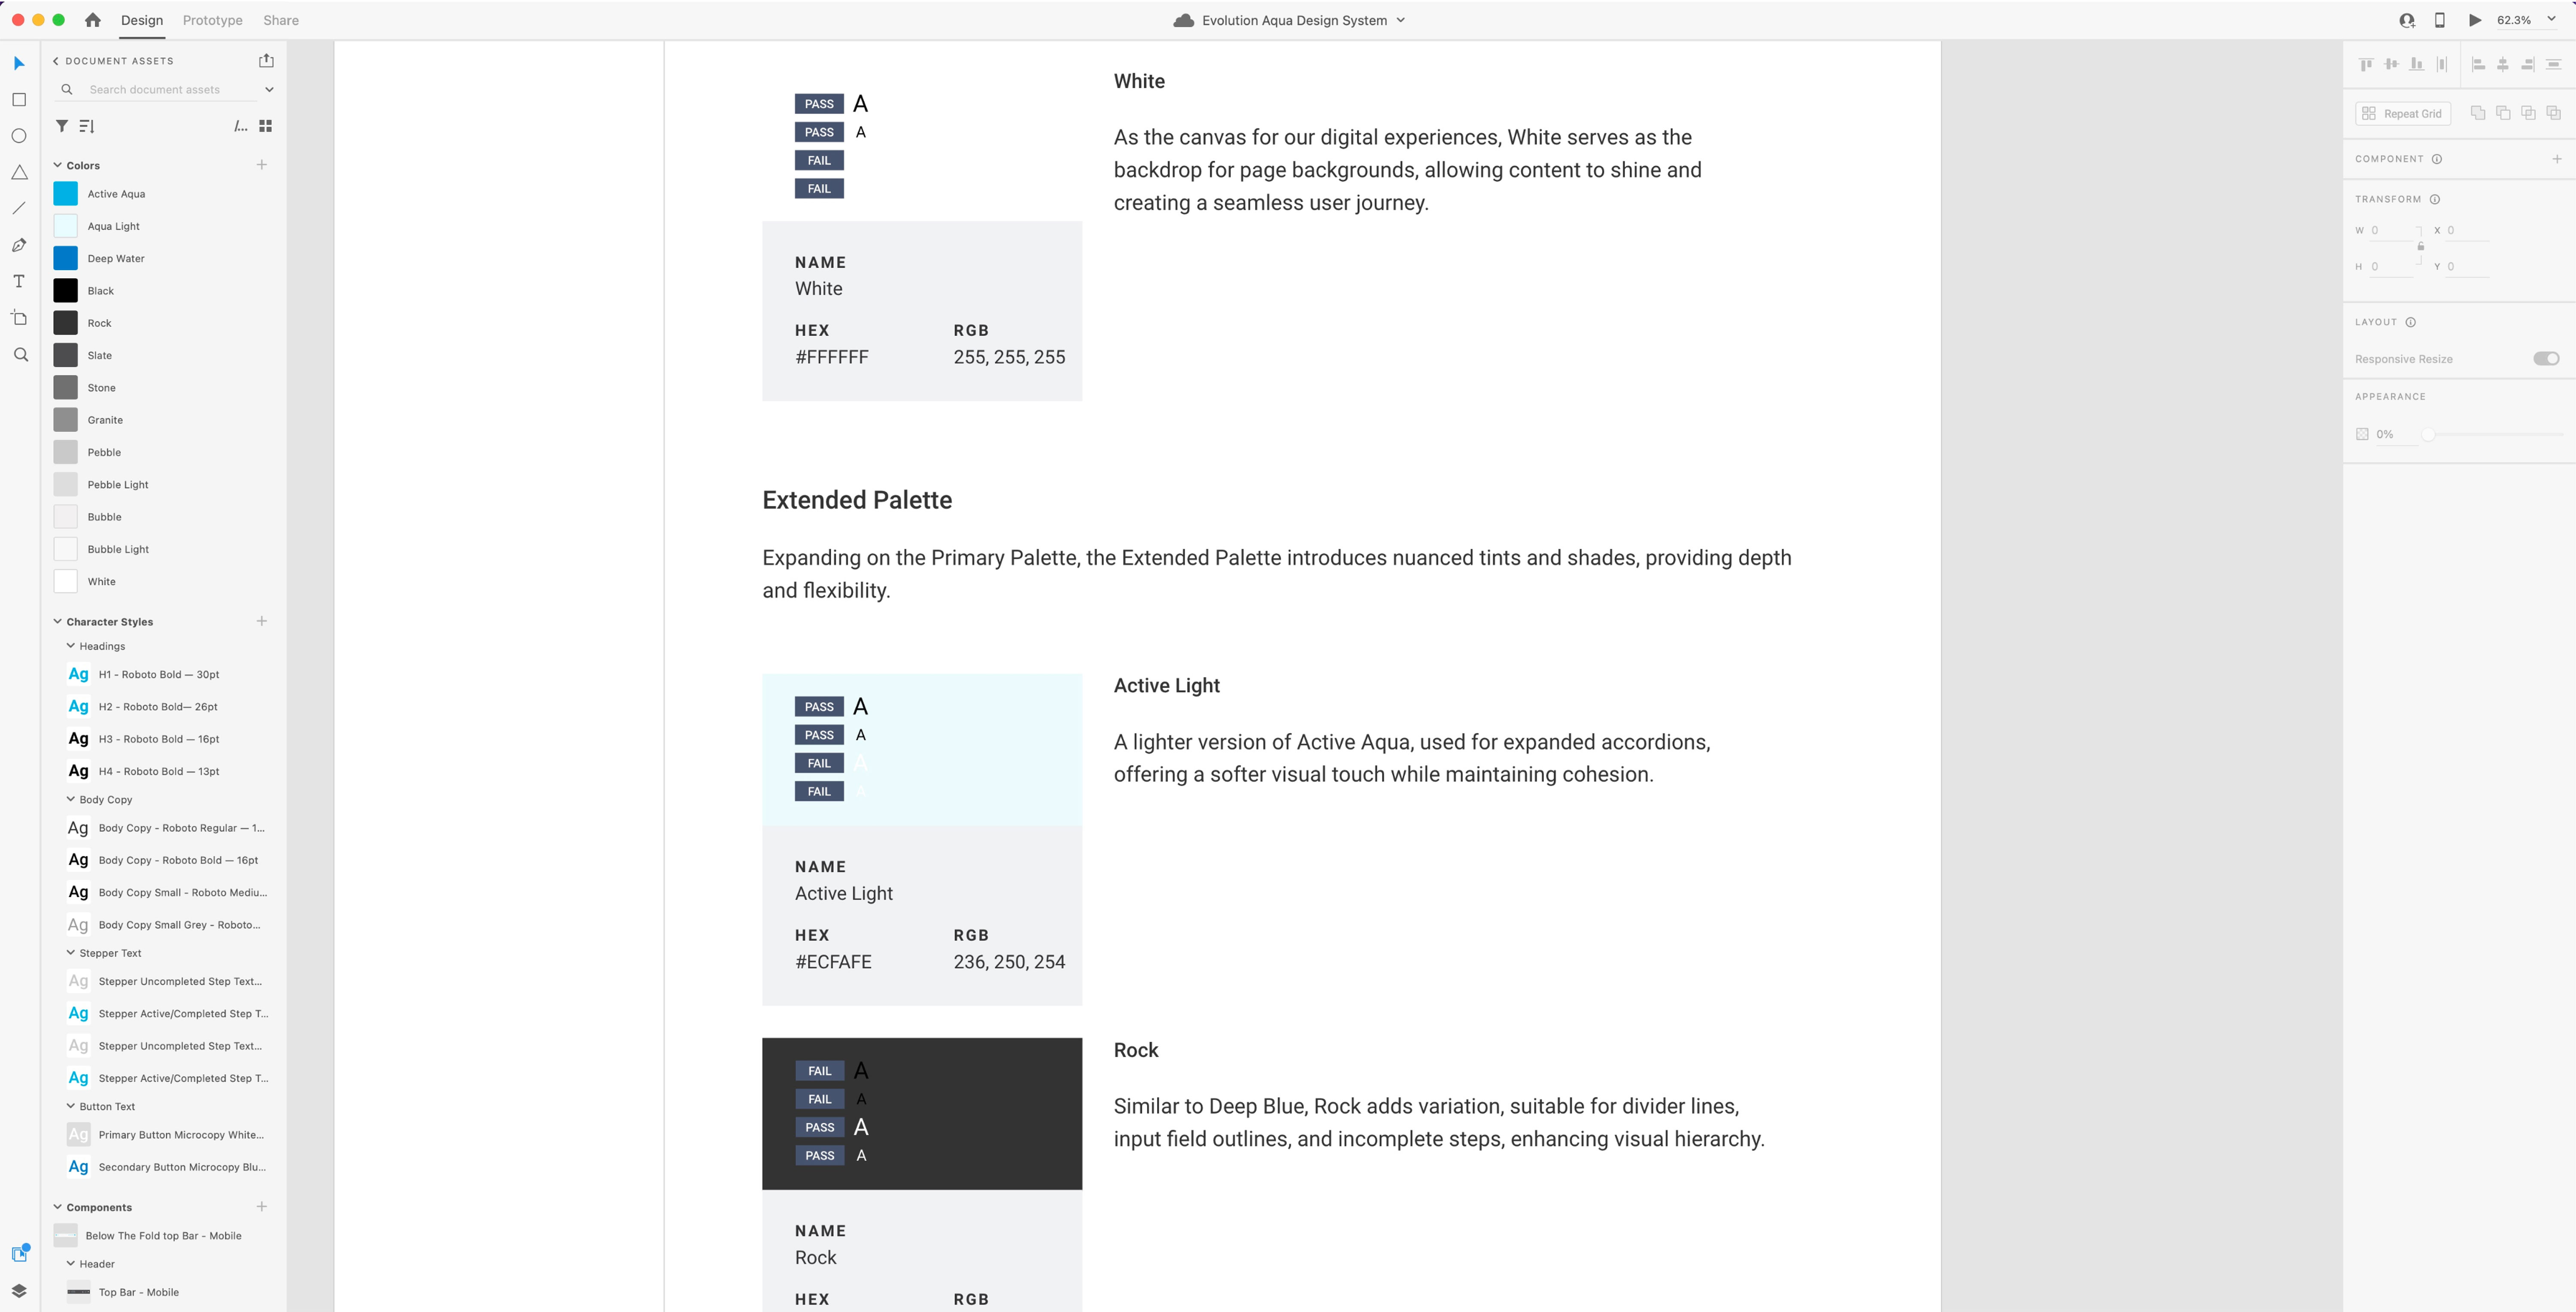 Image showing a page of Colour section of the design system.